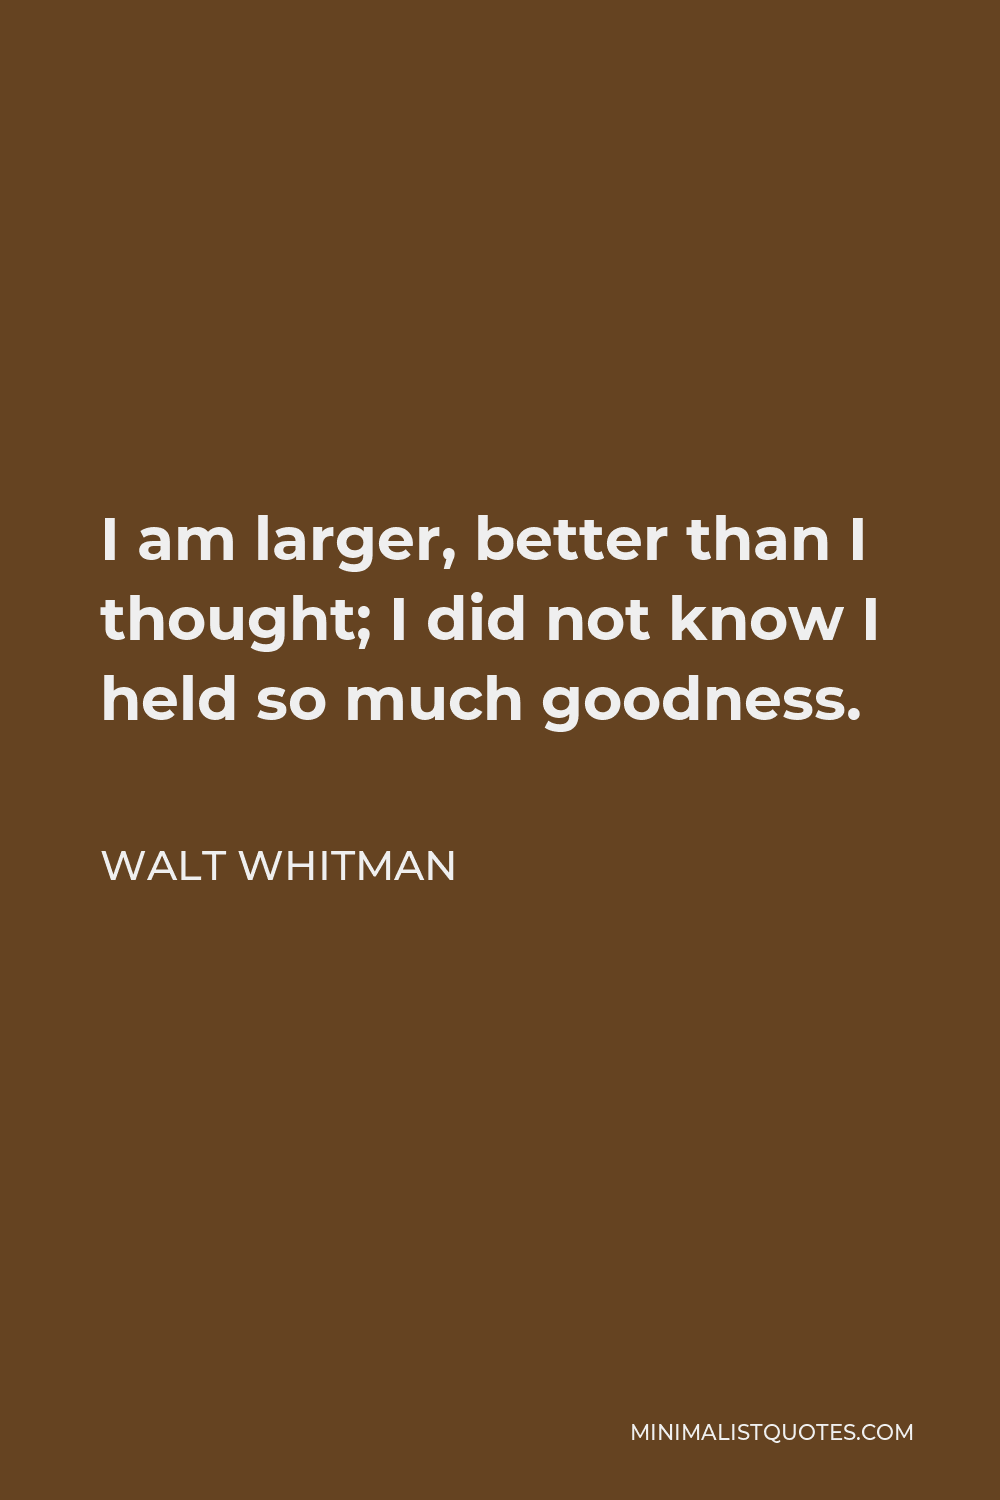 Walt Whitman Quote - I am larger, better than I thought; I did not know I held so much goodness.